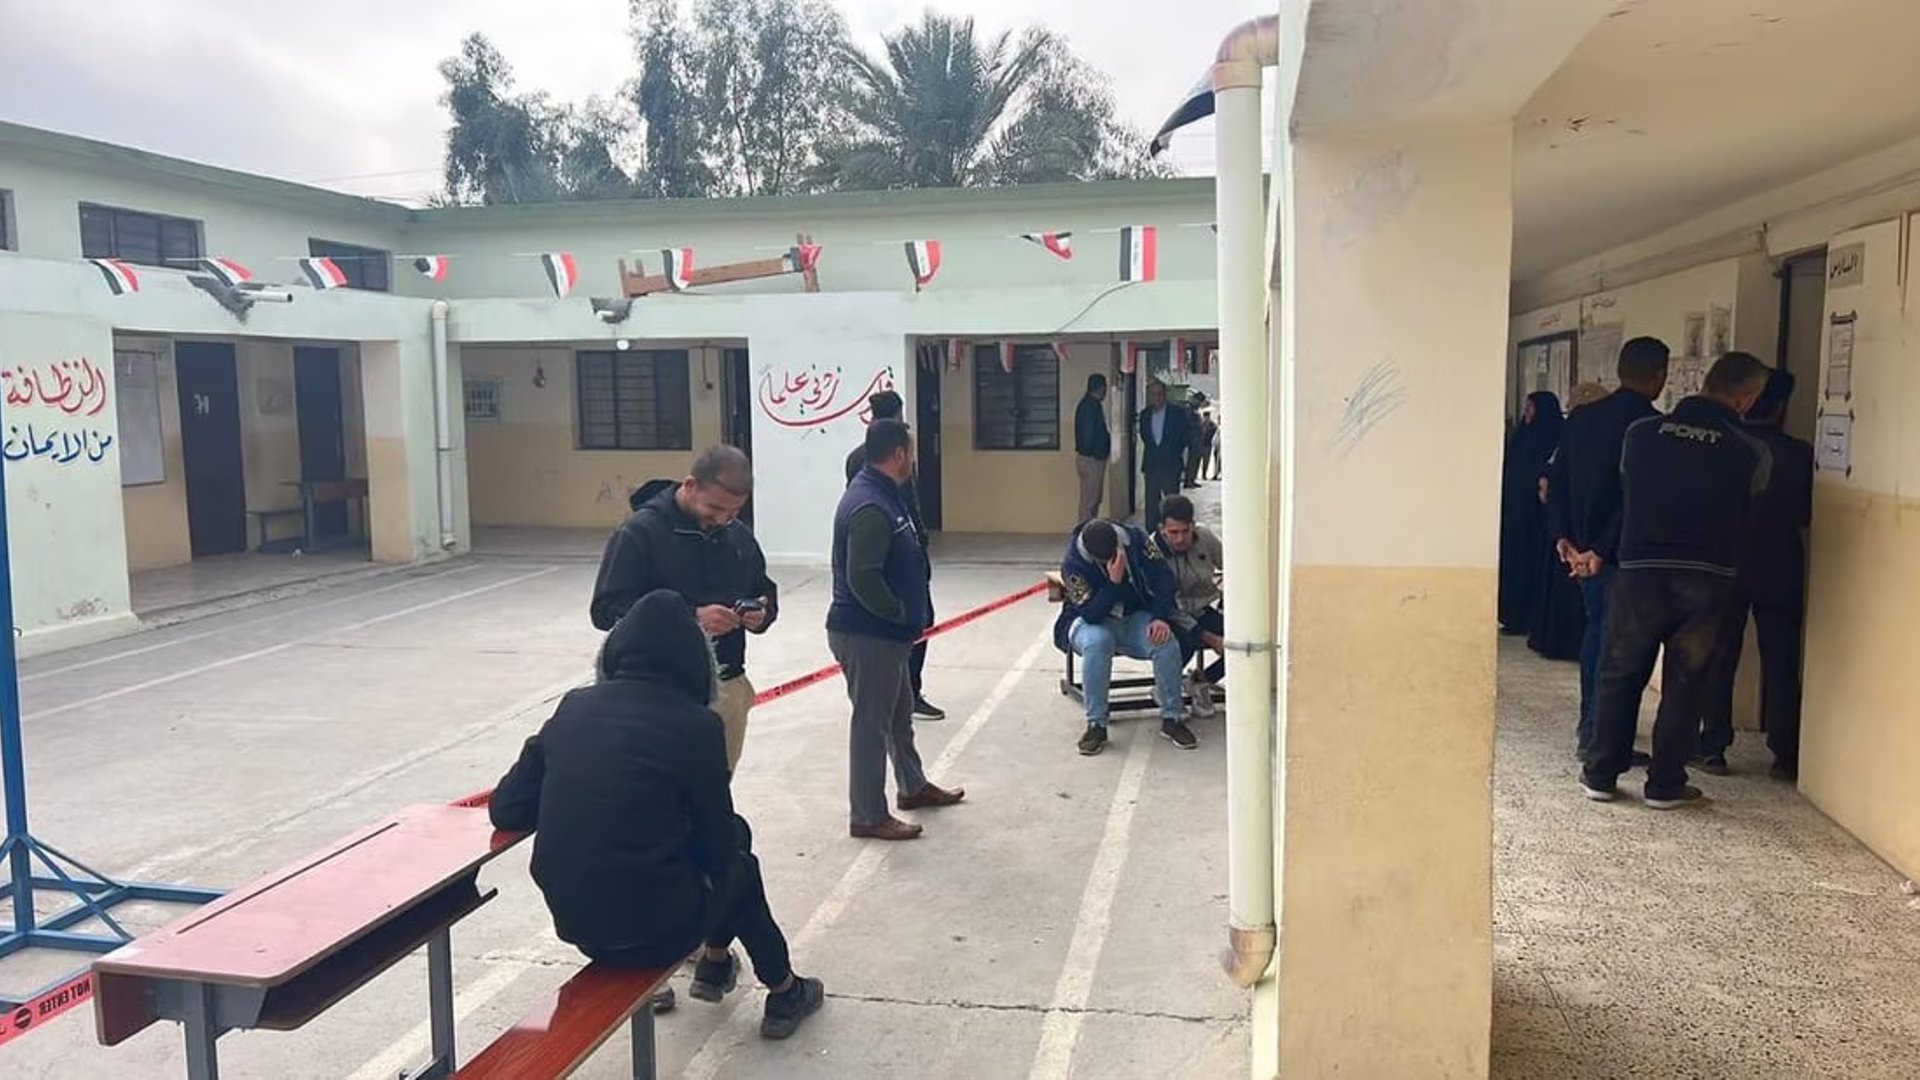 Low voter turnout reported at polling stations in Anbars Hit